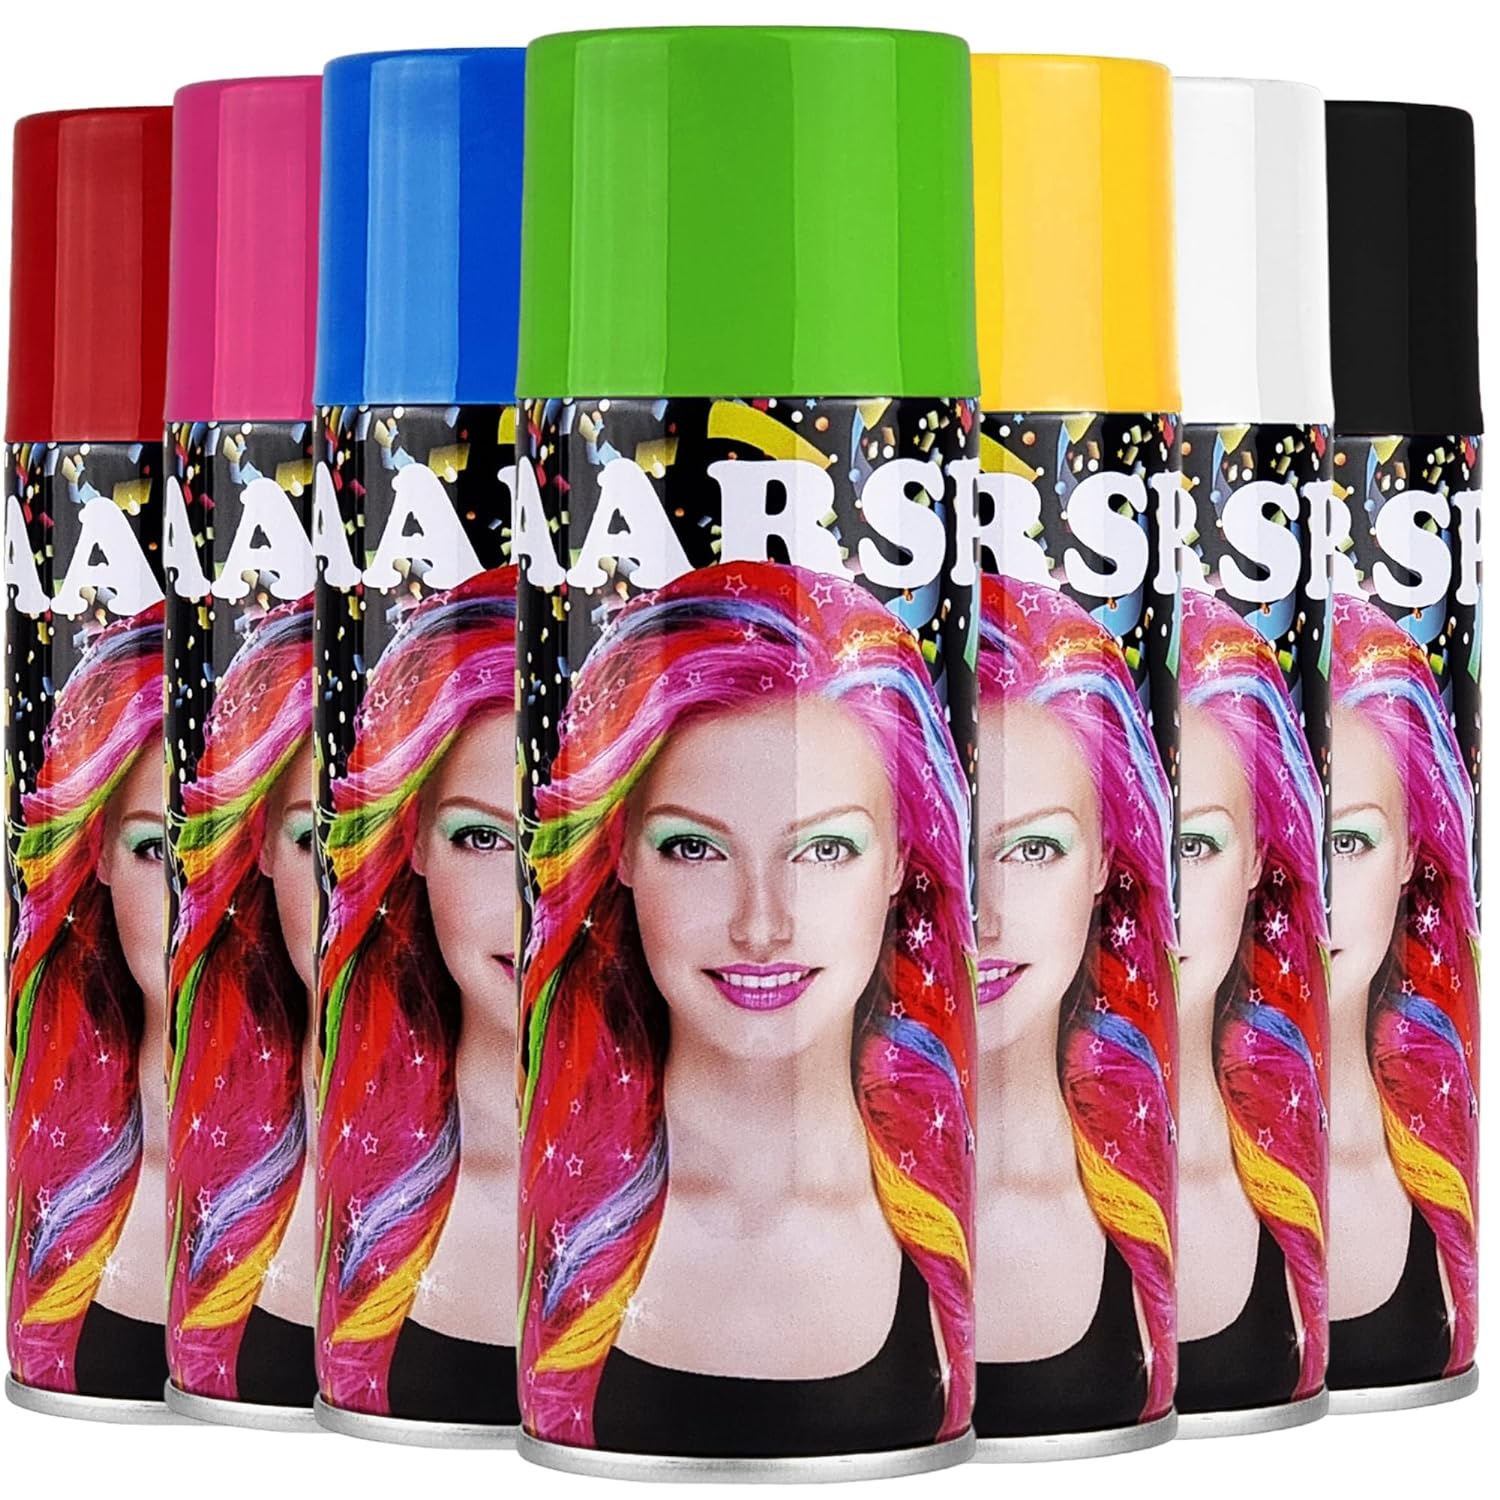 Colored Hair Spray for ColoUnde Hair - 250 ml - in 7 Different Colors - Washes Out - Great Hair Color for Cosplay Halloween or Carnival - Black